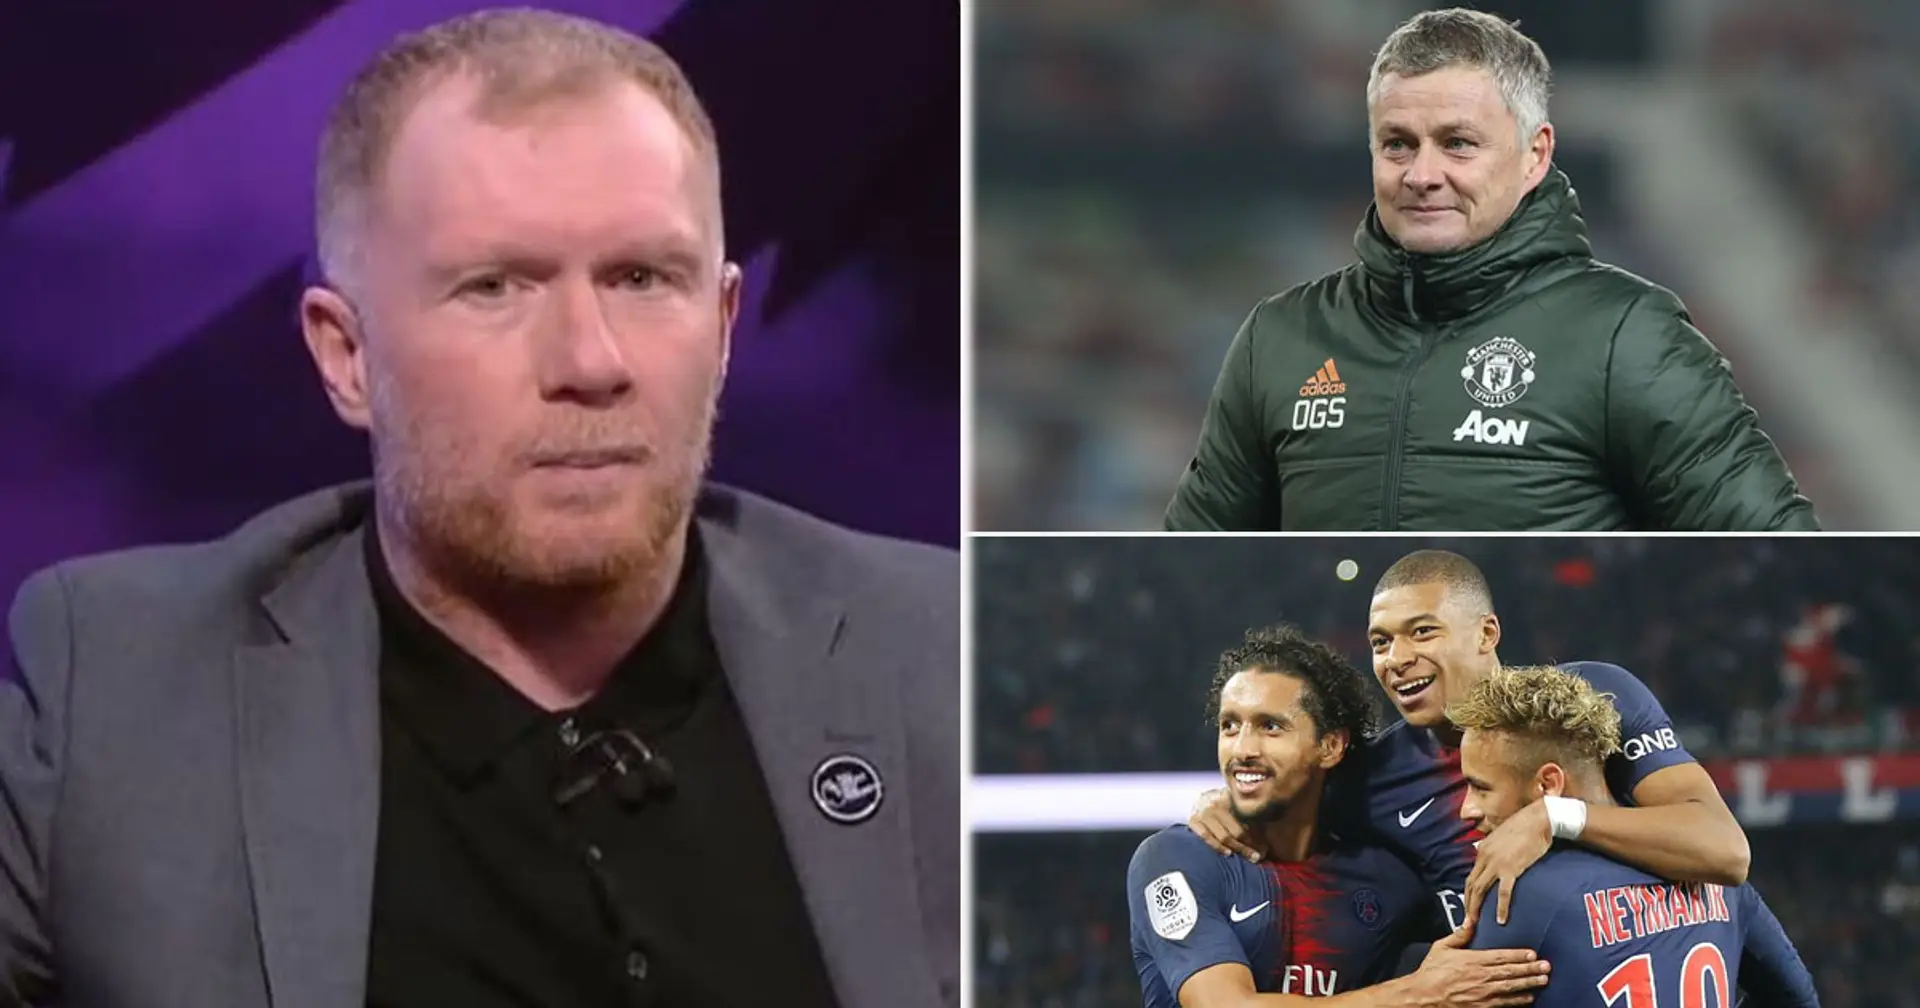 Scholes names 2 signings United must make to compete for Premier League title - includes one PSG star